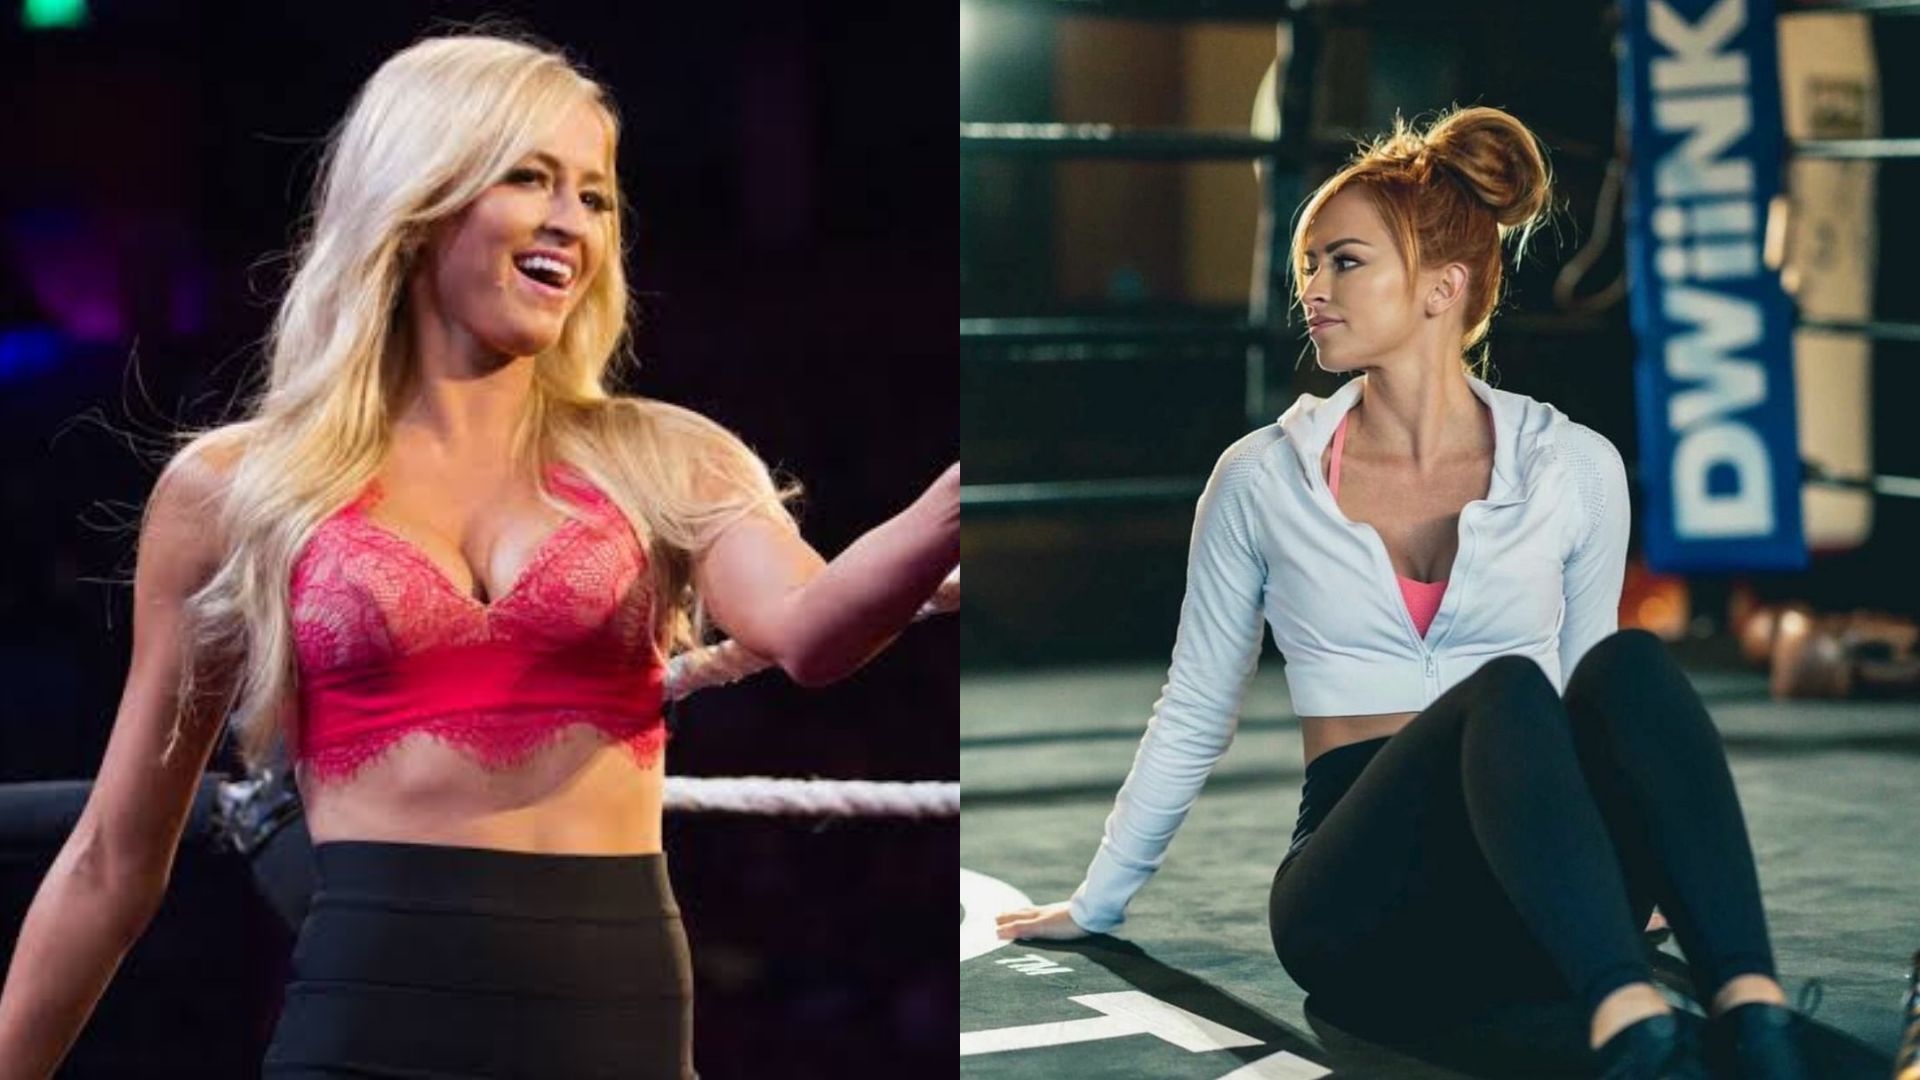 Summer Rae has reunited with a former WWE star.